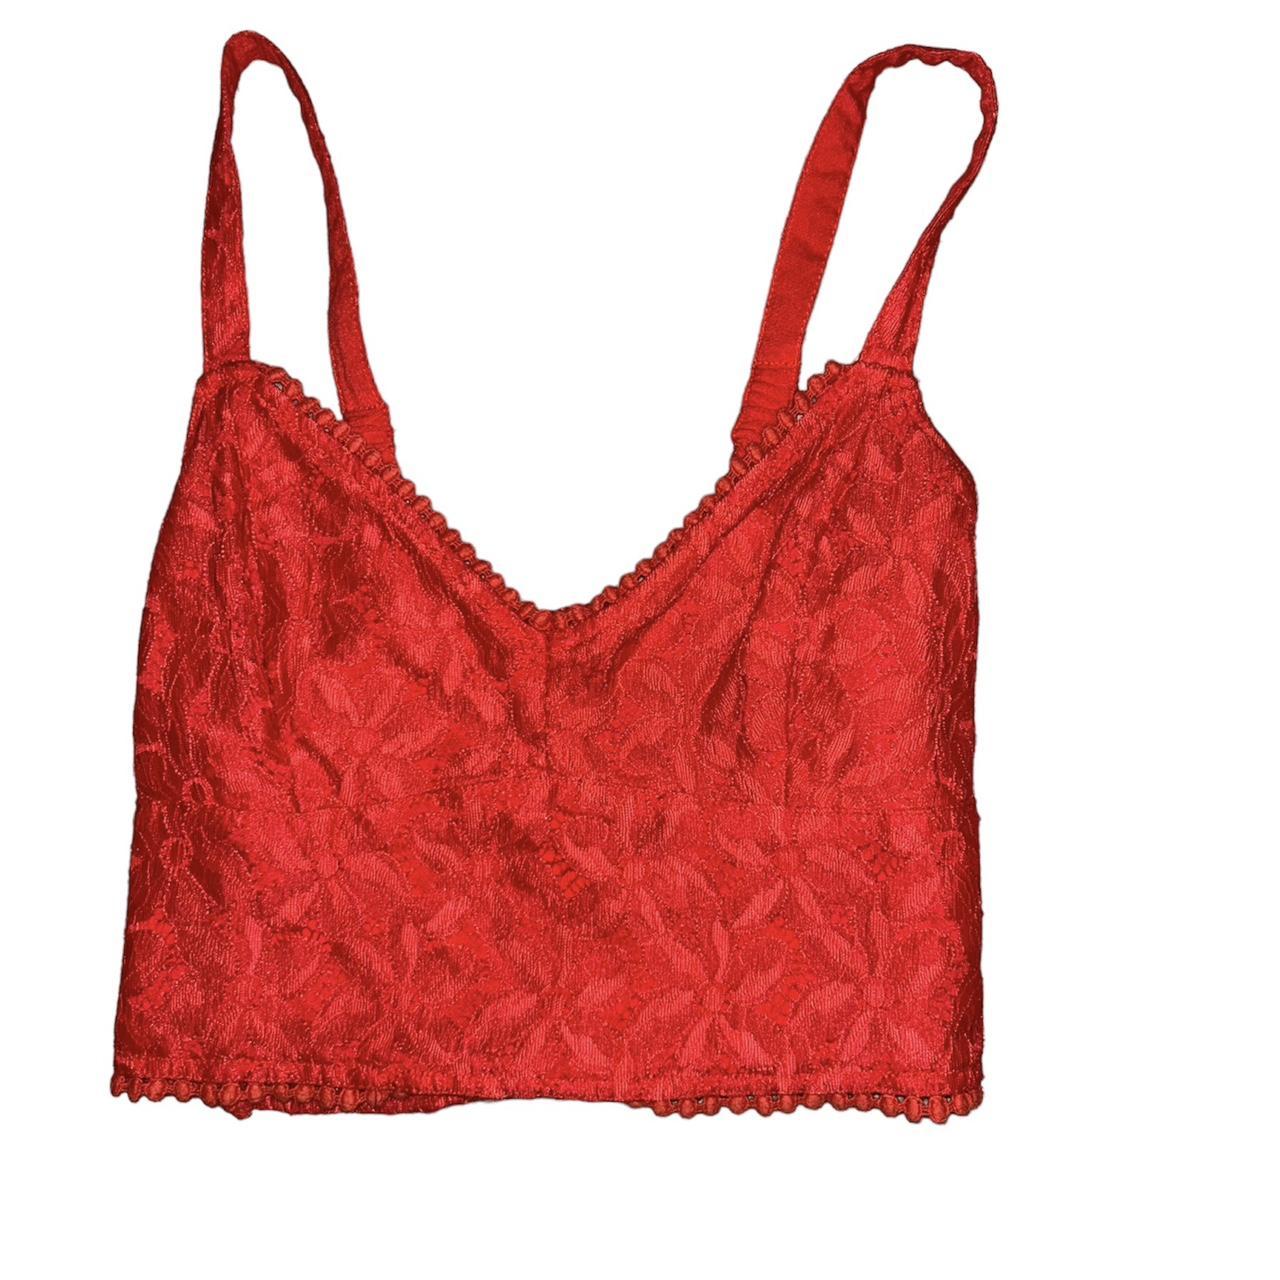 red lace bralette top, brand- hollister